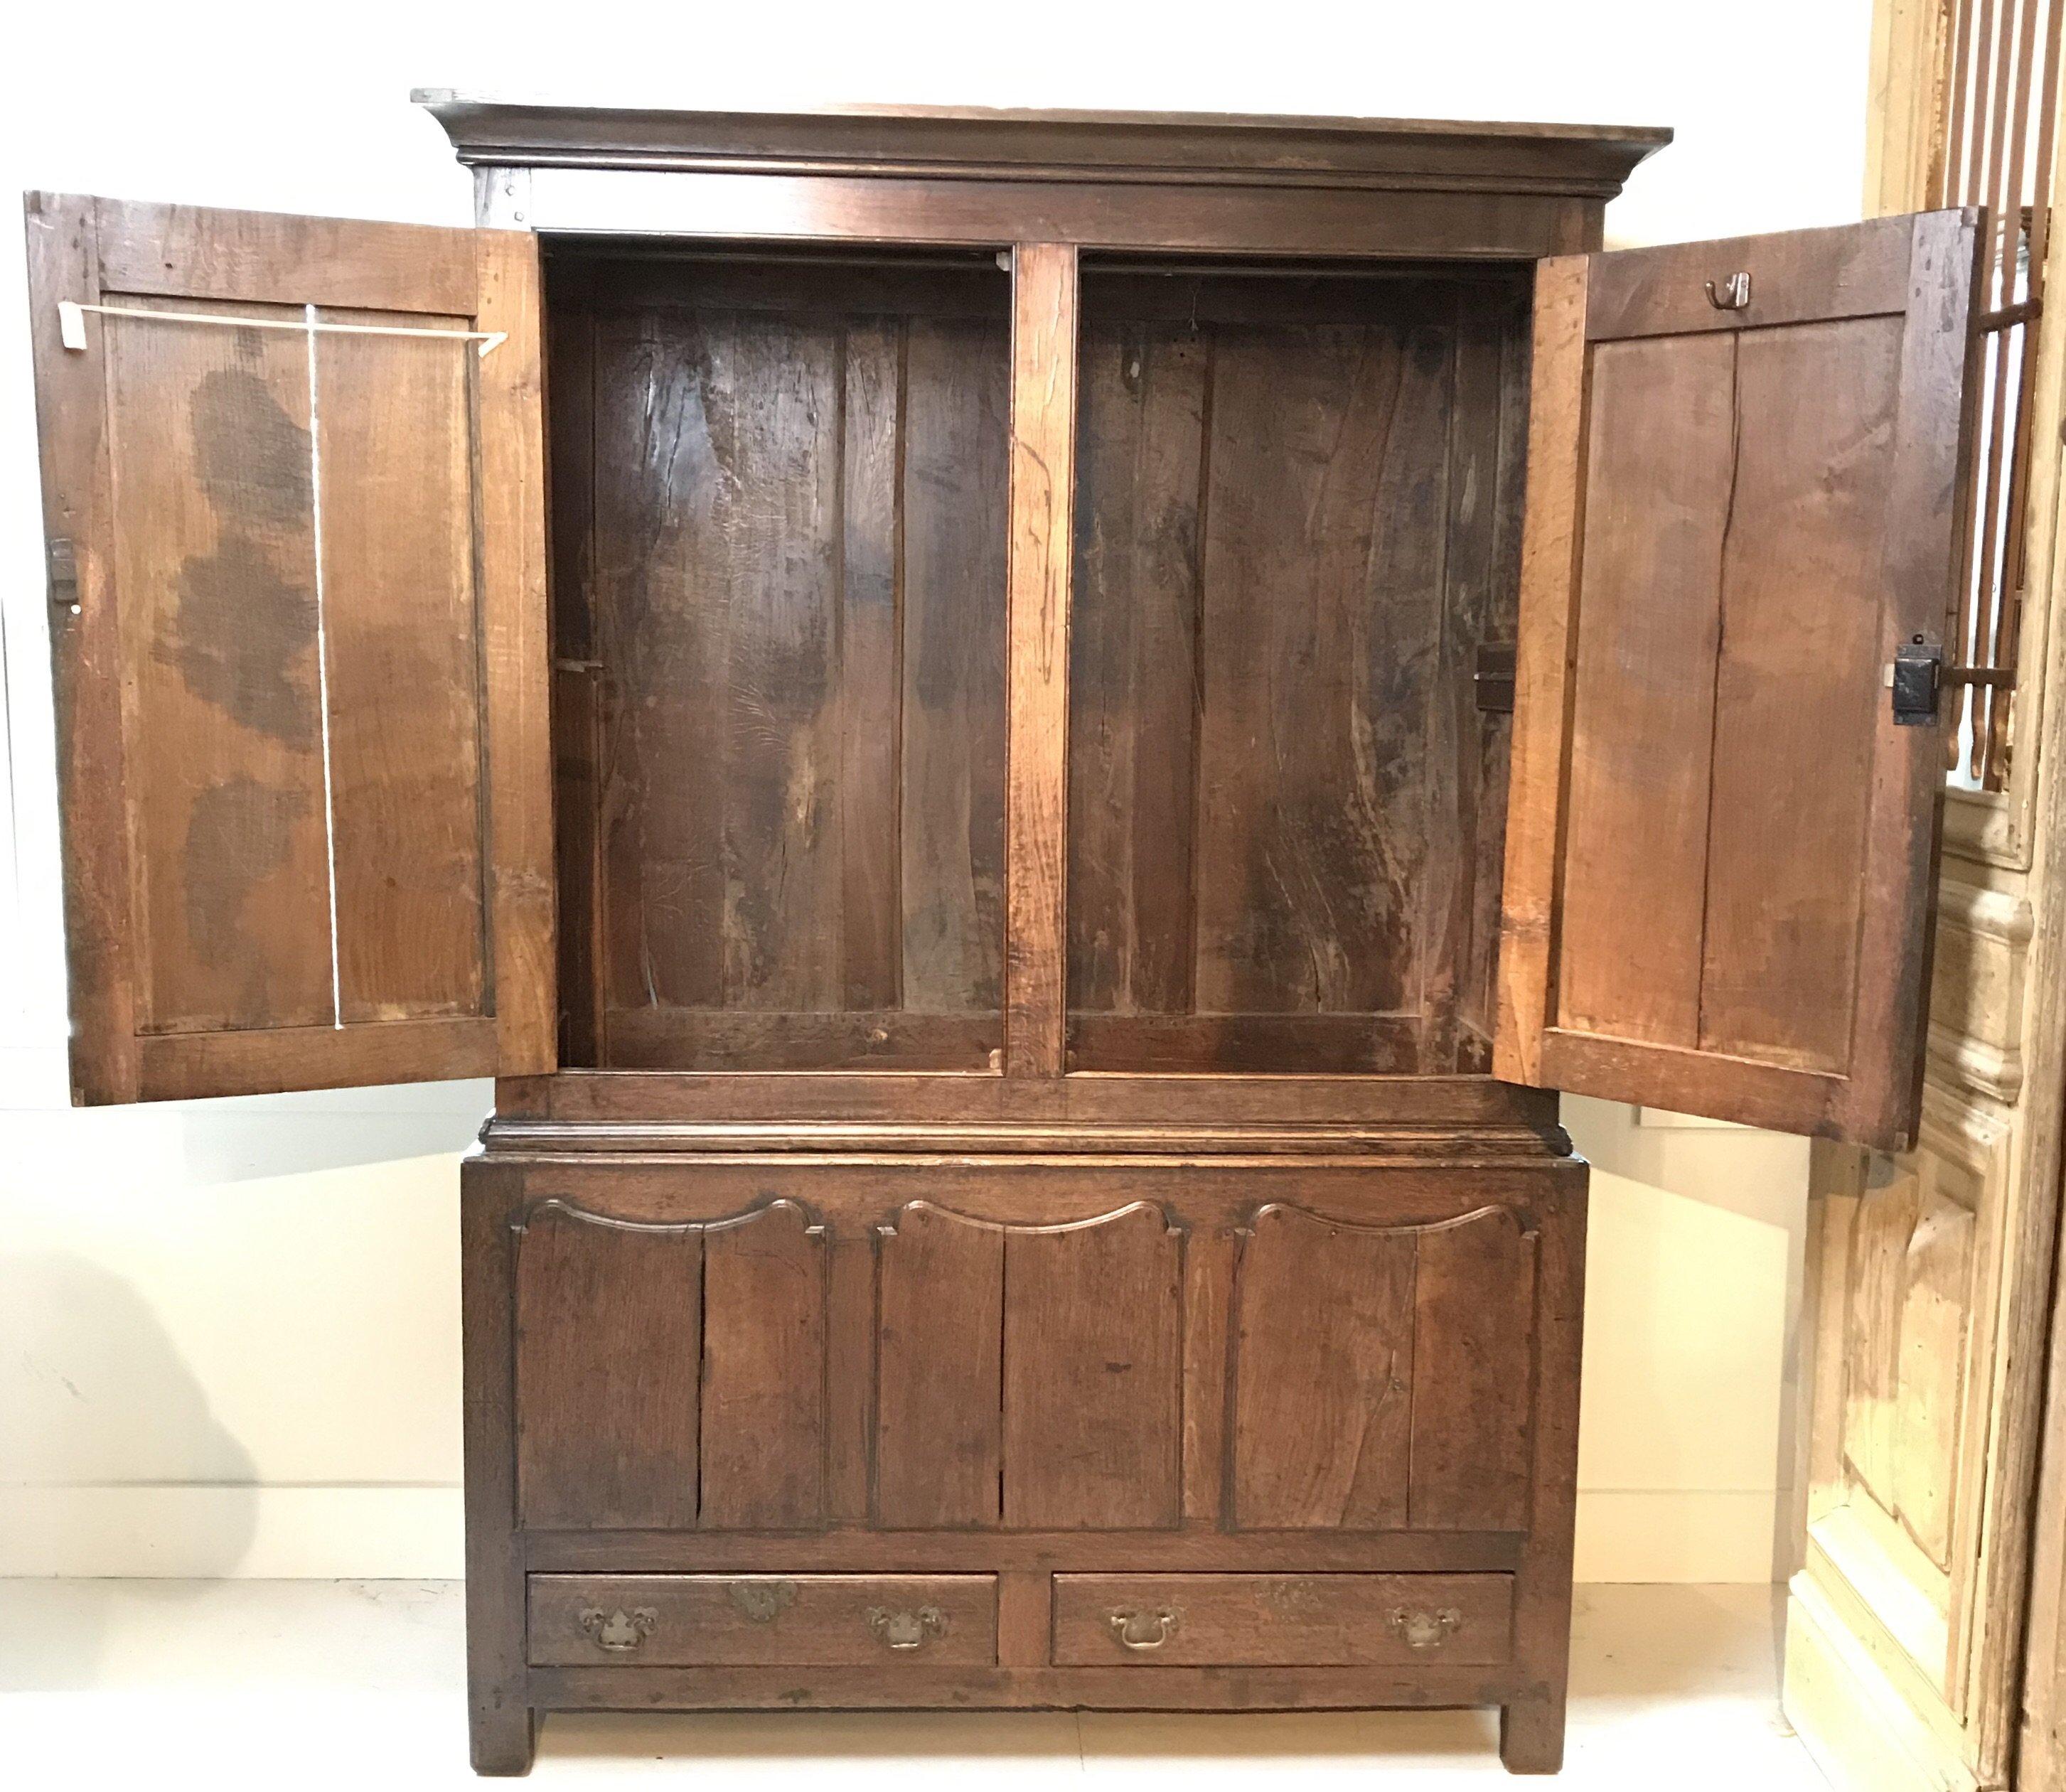 Early oak Welsh wardrobe/armoire 18th century Livery tack, Harness Hall cupboard
Bought in the South of England, this is a character rich early oak Welsh wardrobe used in fine houses for storage of livery, tack and harnesses - an early 